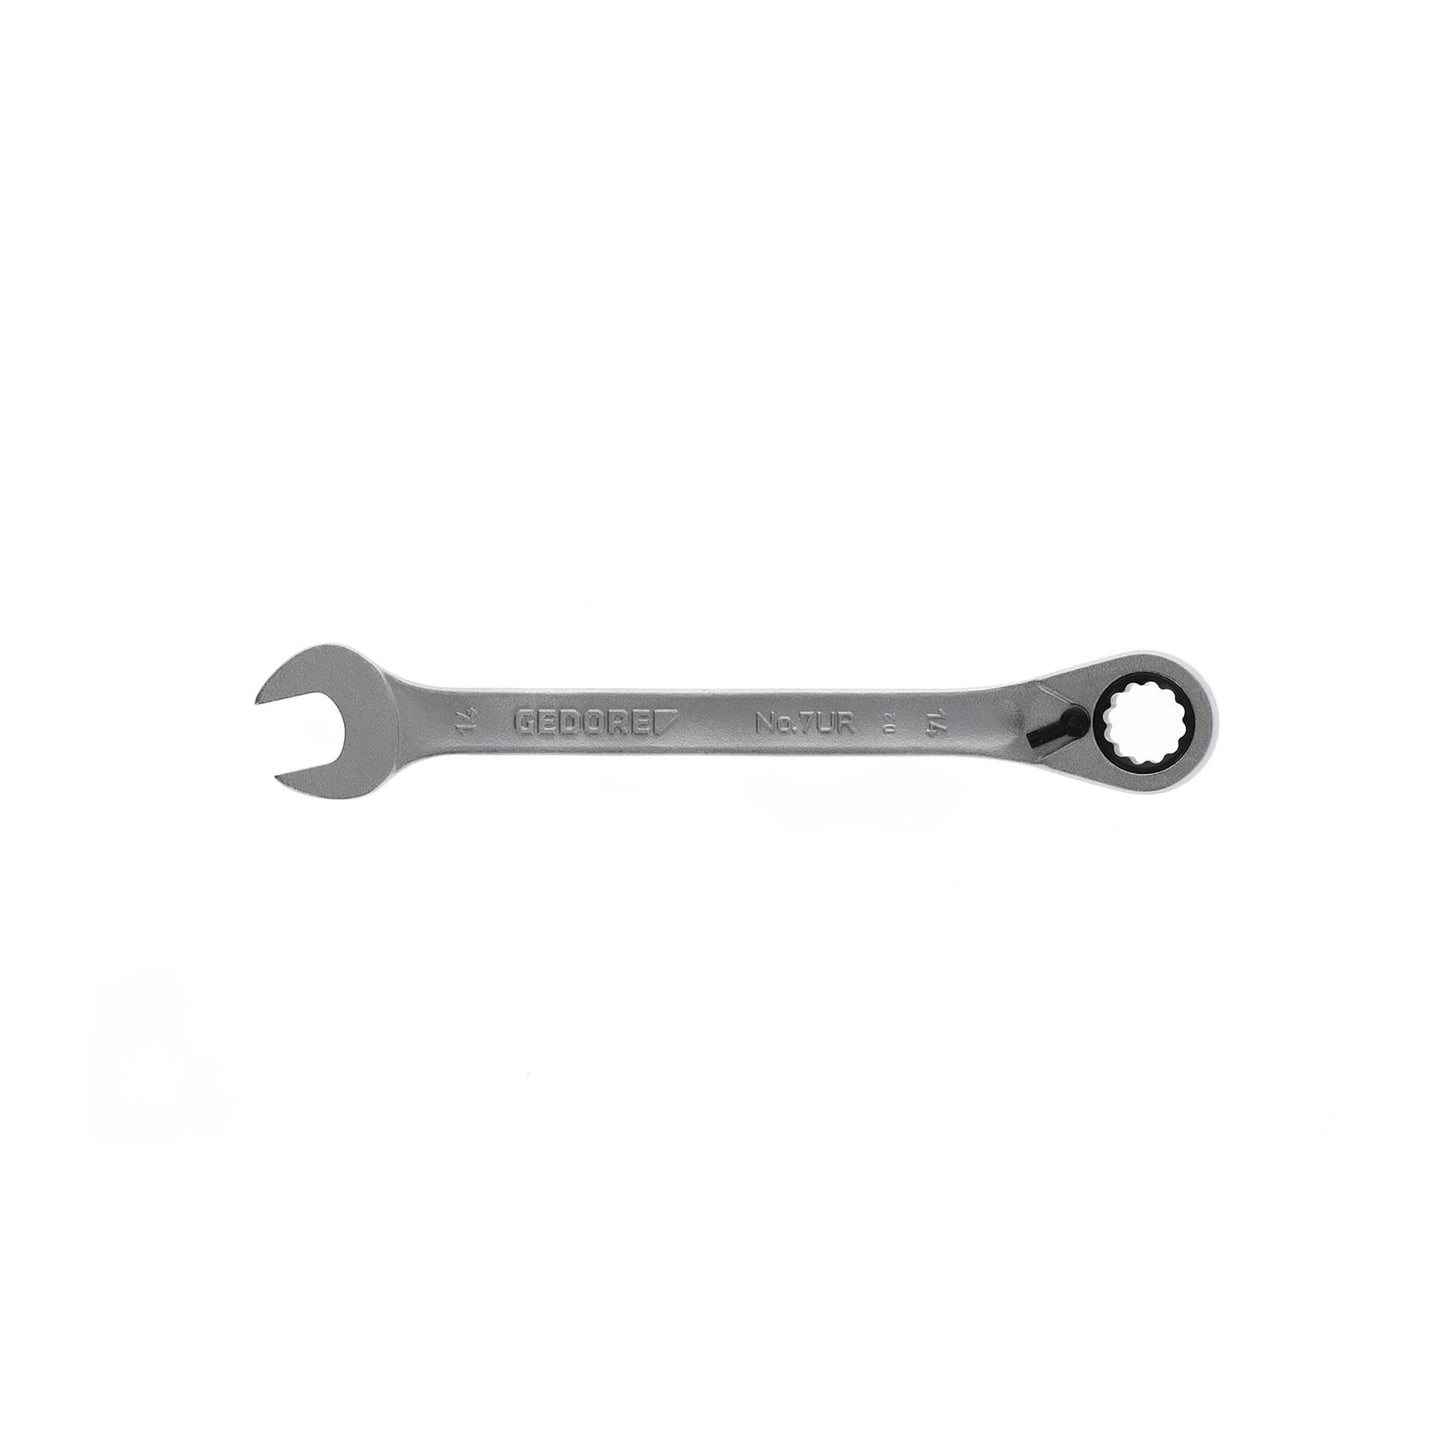 GEDORE 7 UR 14 - Ratchet combination wrench, 14mm (2297310)